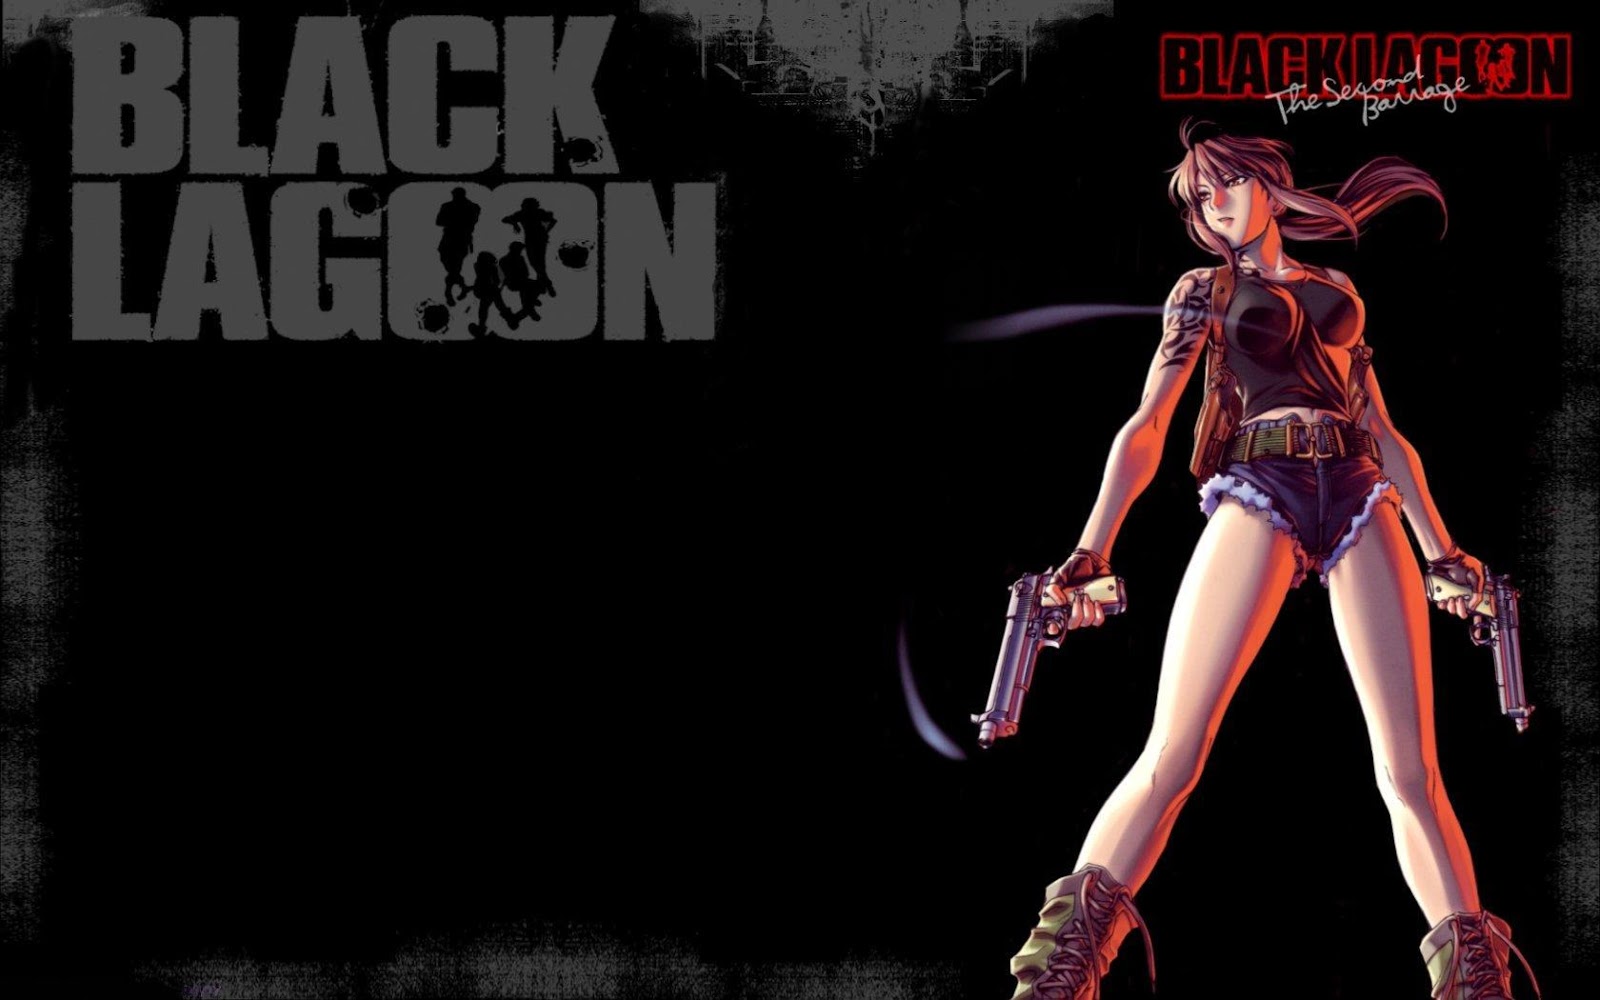 Free Download Black Lagoon Hd Wallpaper 1600x1000 Your Daily Anime Wallpaper And 1600x1000 For Your Desktop Mobile Tablet Explore 76 Black Lagoon Wallpaper Black Anime Wallpaper Revy Black Lagoon